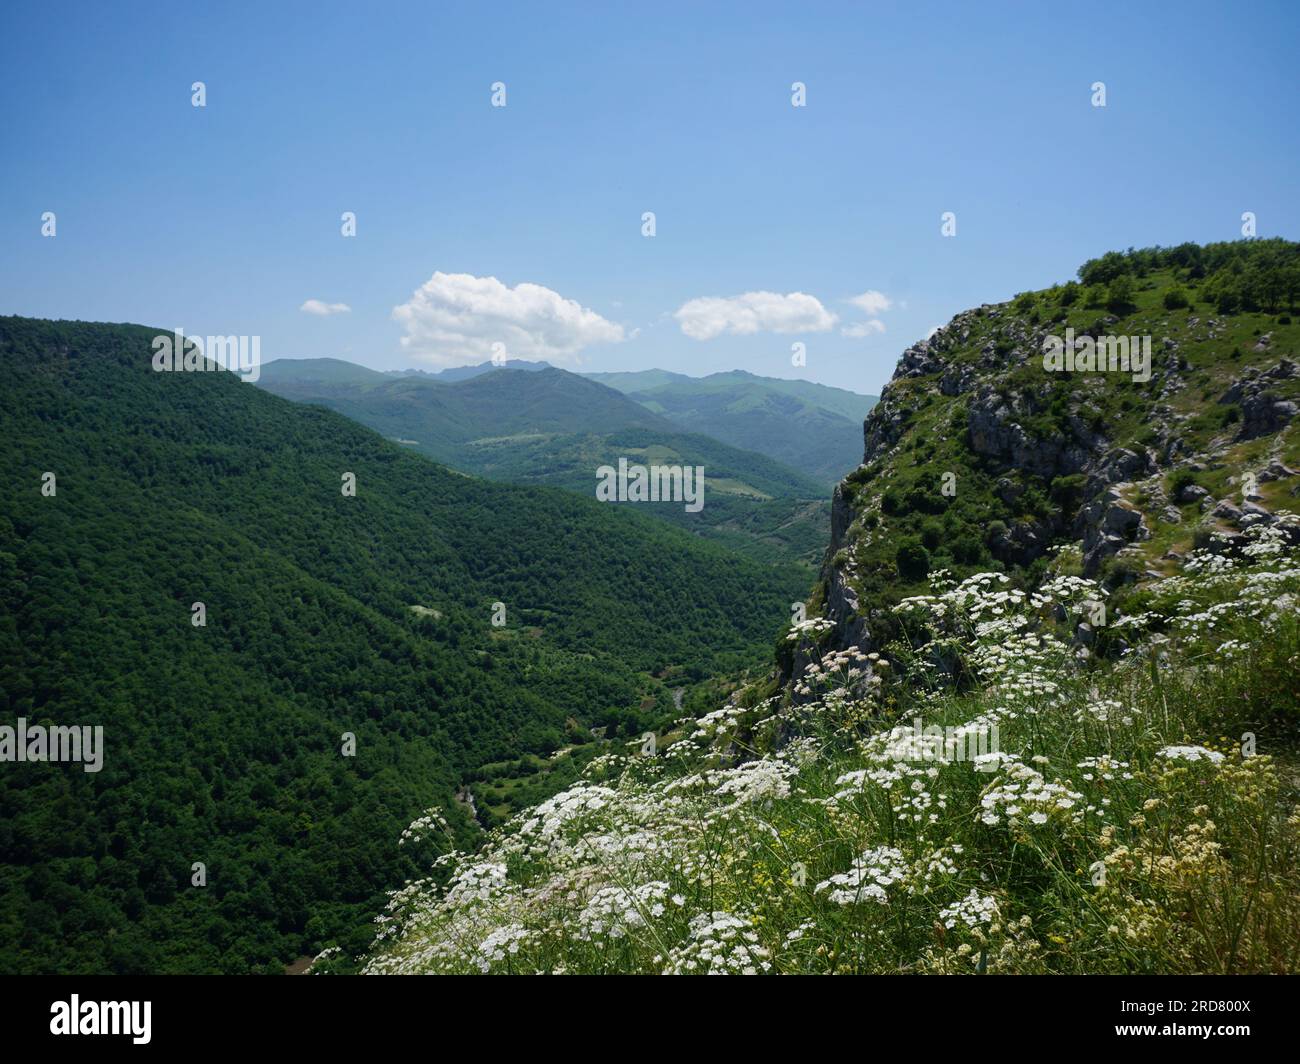 General view of Nagorno-Karabakh from a mountain in Shusha, Nagorno-Karabakh. The unrecognised yet de facto independent country in South Caucasus, Nagorno-Karabakh (also known as Artsakh) has been in the longest-running territorial dispute between Azerbaijan and Armenia in post-Soviet Eurasia since the collapse of Soviet Union. It is mainly populated by ethnic Armenians. Stock Photo